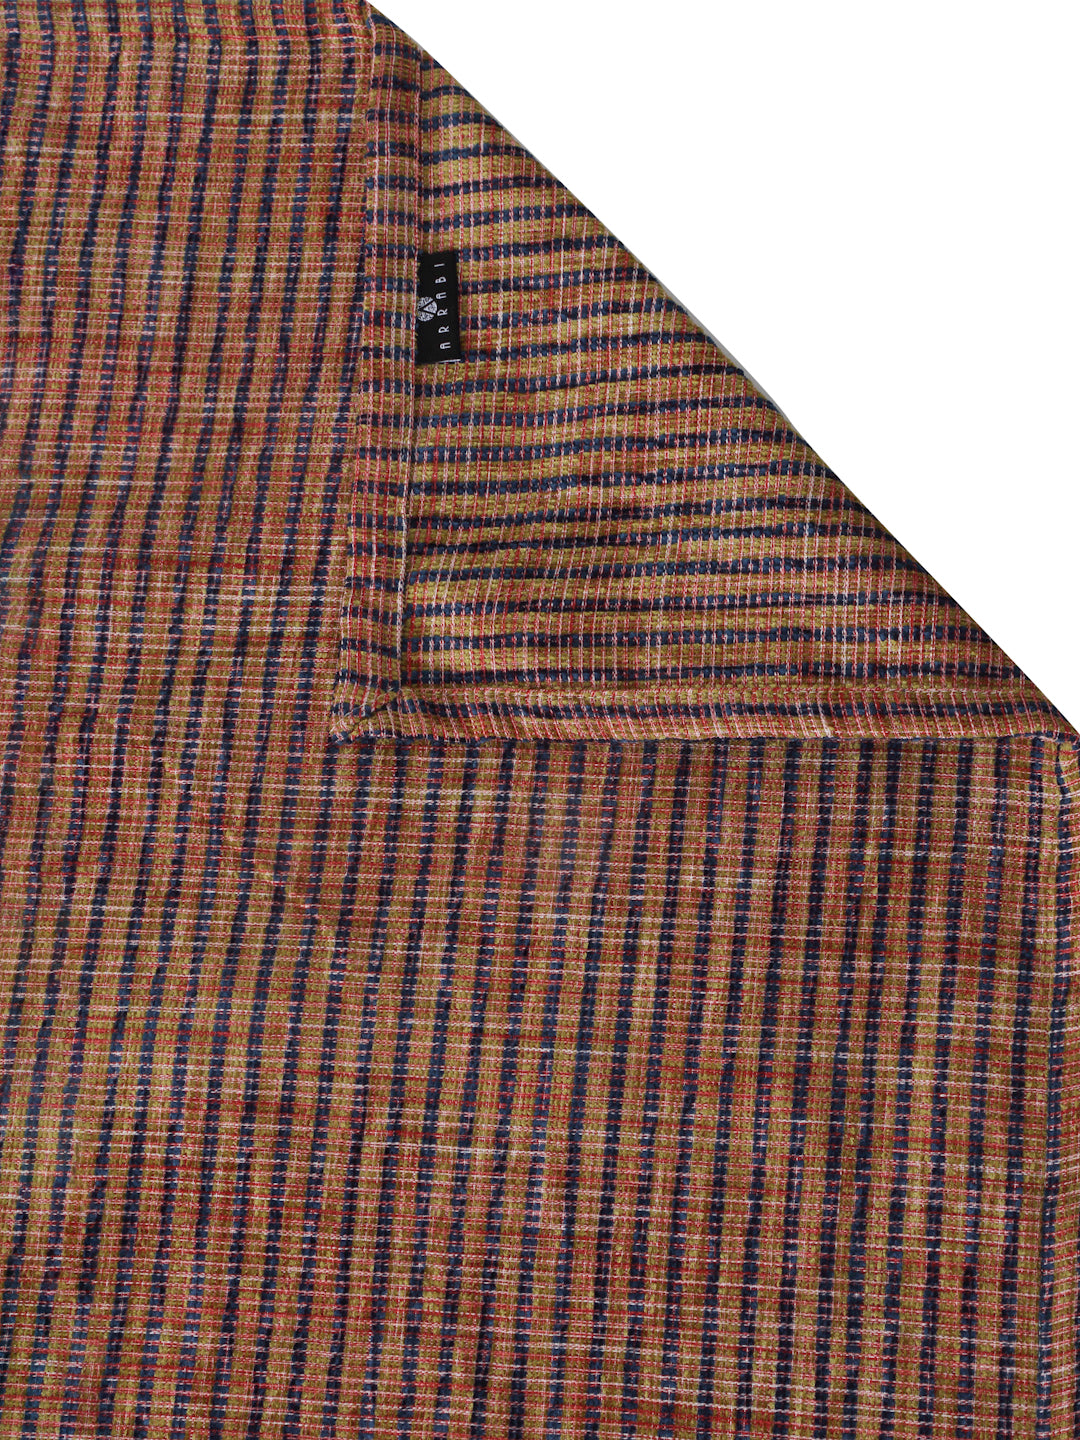 Arrabi Brown Stripes Handwoven Cotton king Size Bedsheet with 2 Pillow Covers (260 X 230 cm)